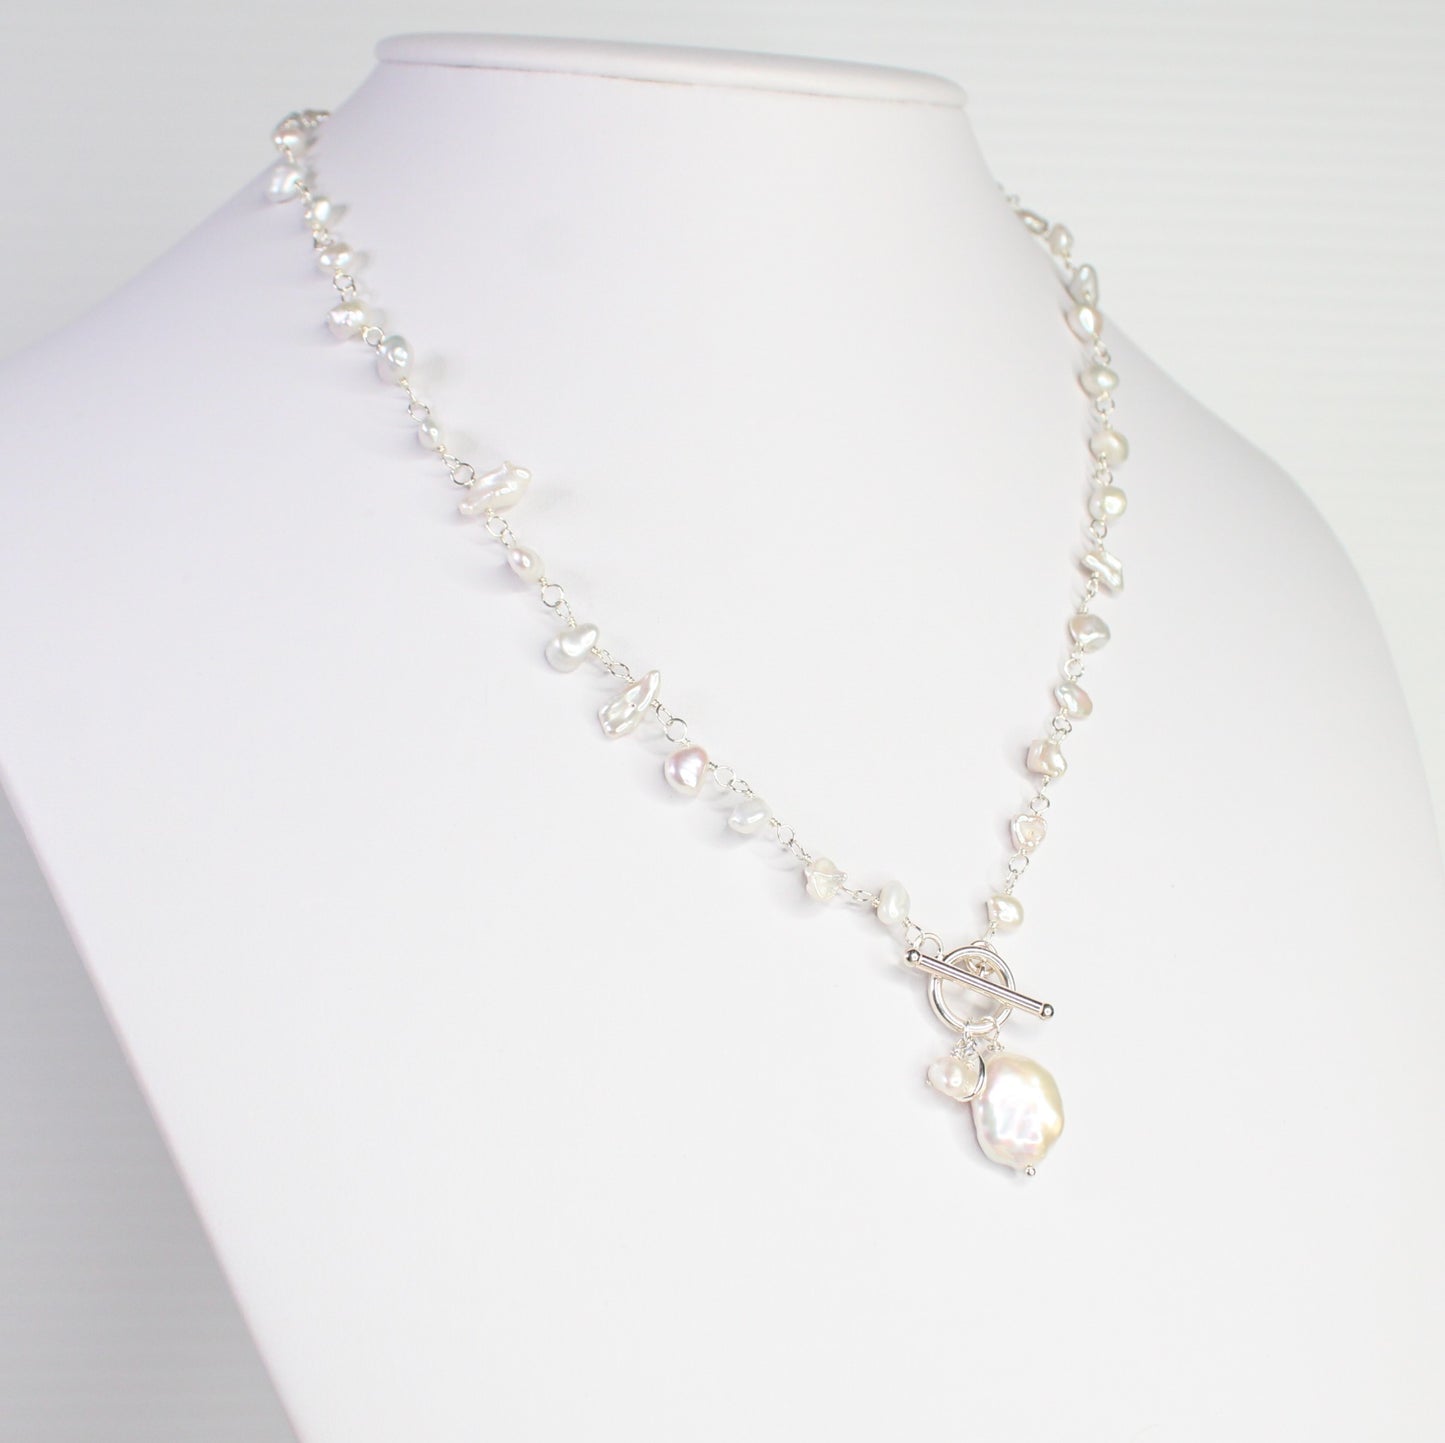 Keshi Pearl Necklace - Chantilly Silver